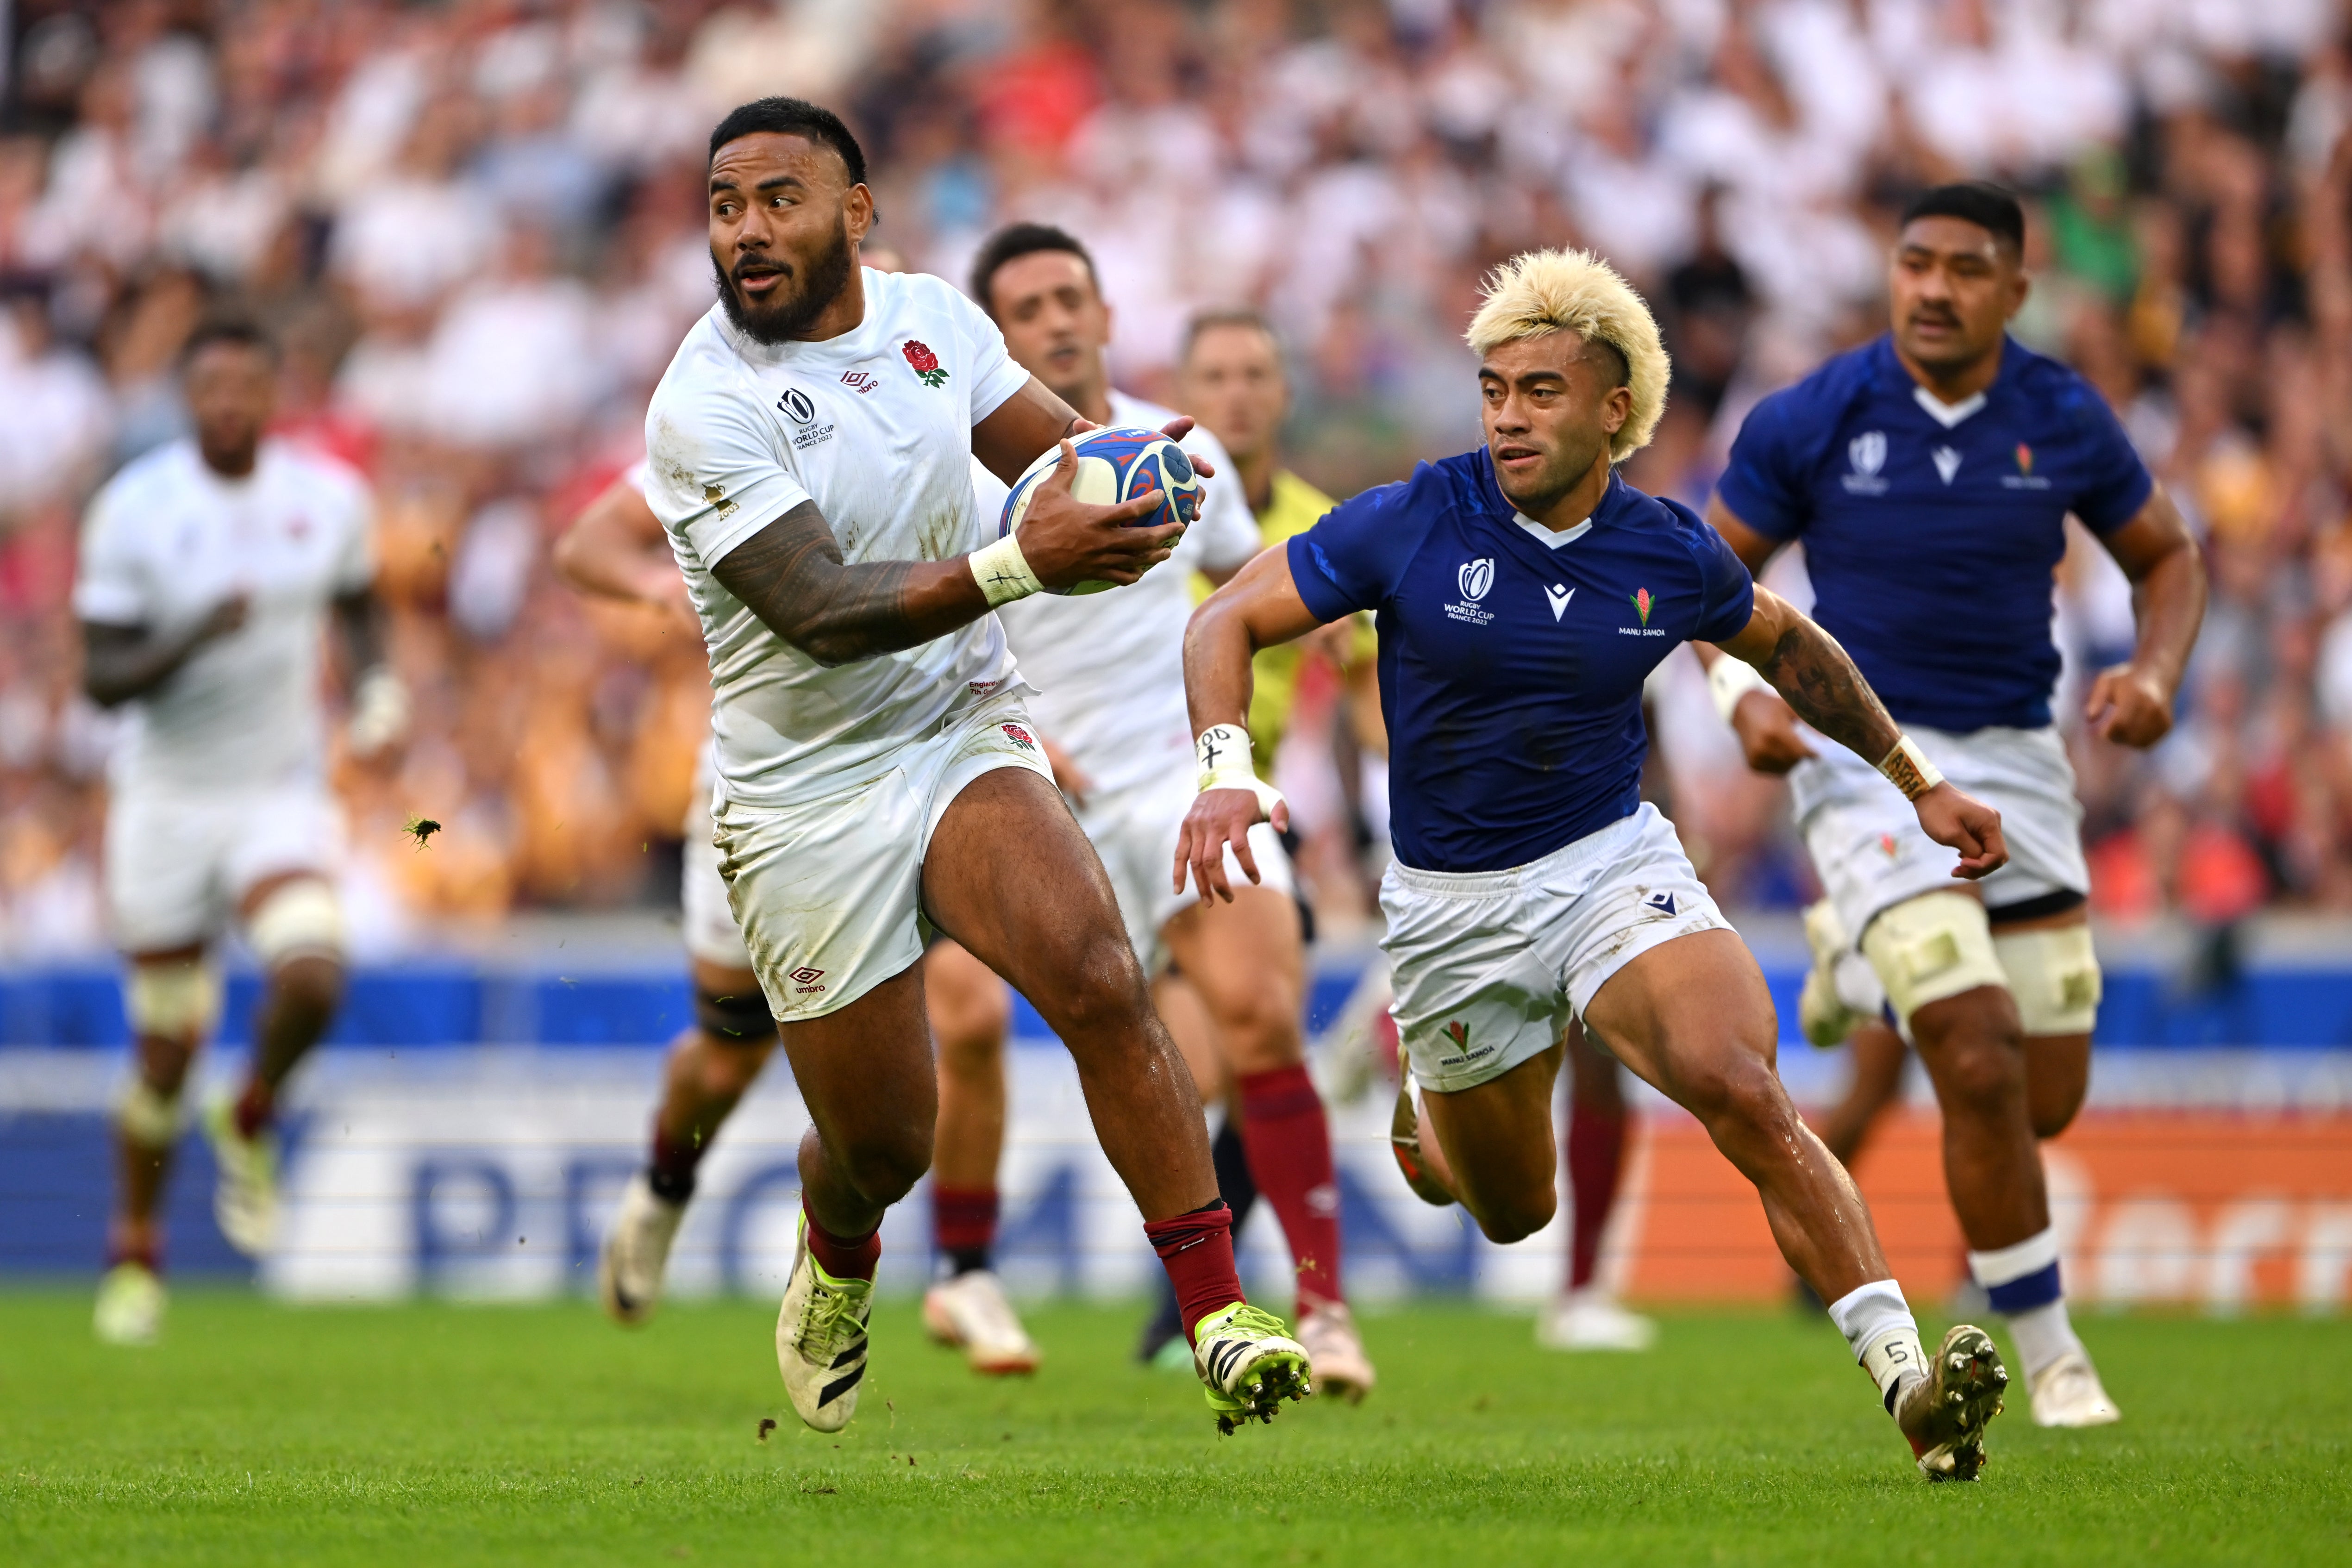 Tuilagi has been key for England under a number of different coaches